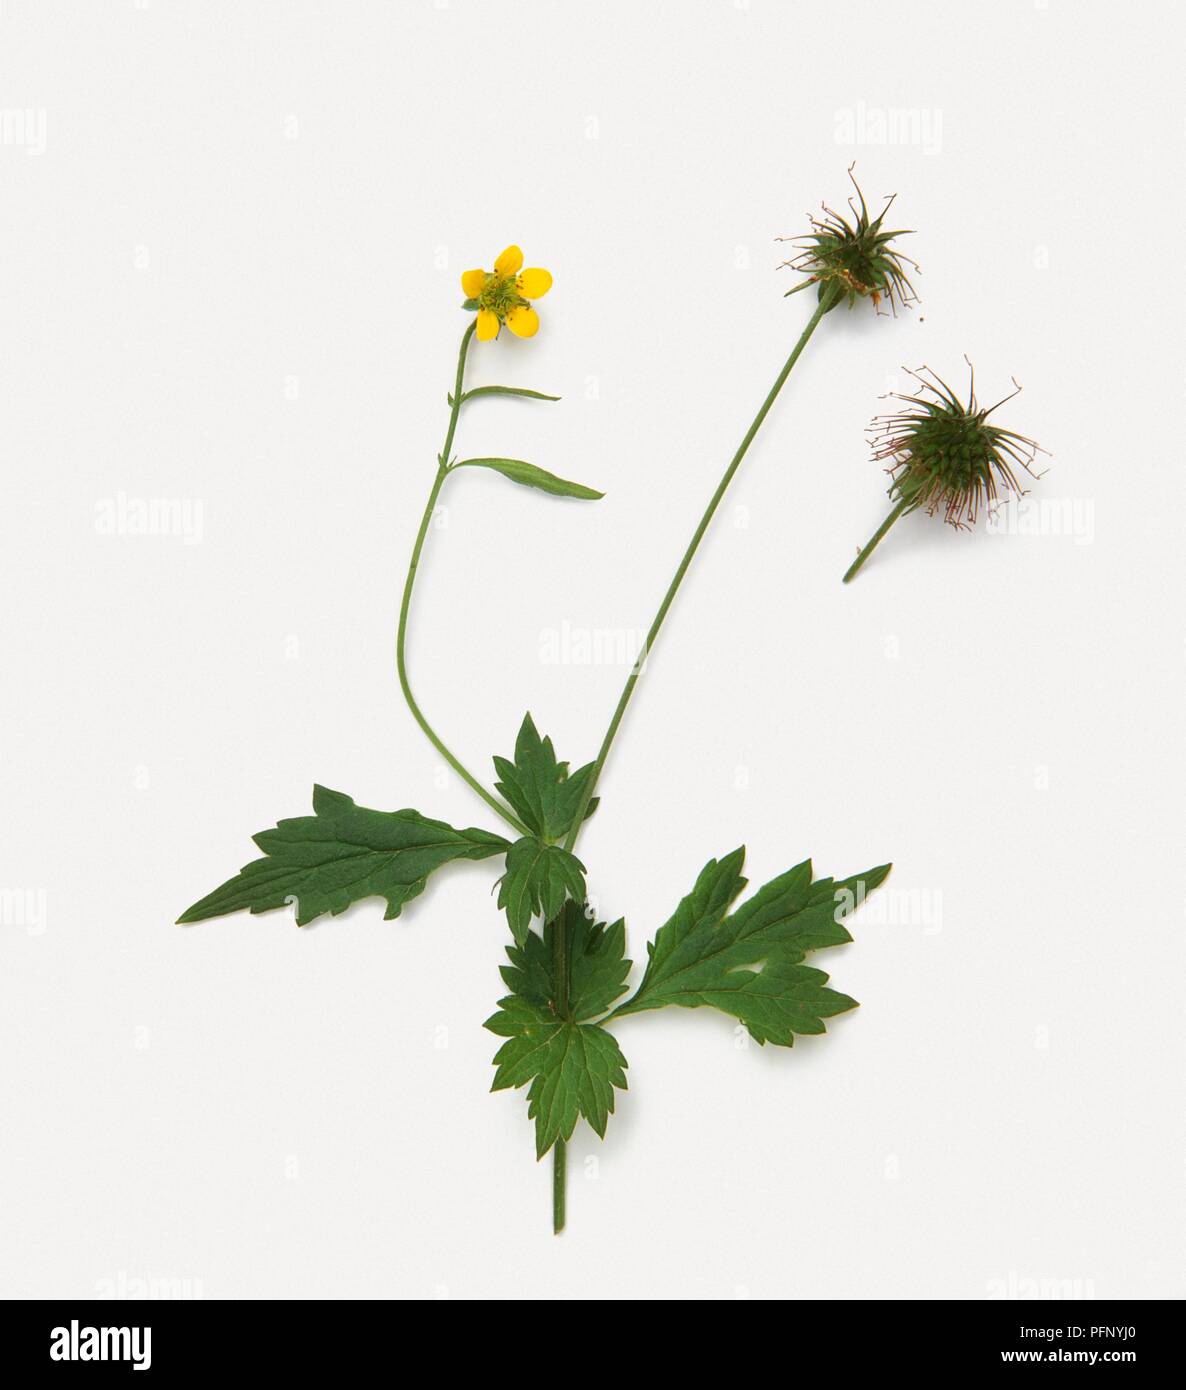 Geum Urbanum Herb Bennet Or Wood Avens Stems With Leaves Flower And Fruit Stock Photo Alamy